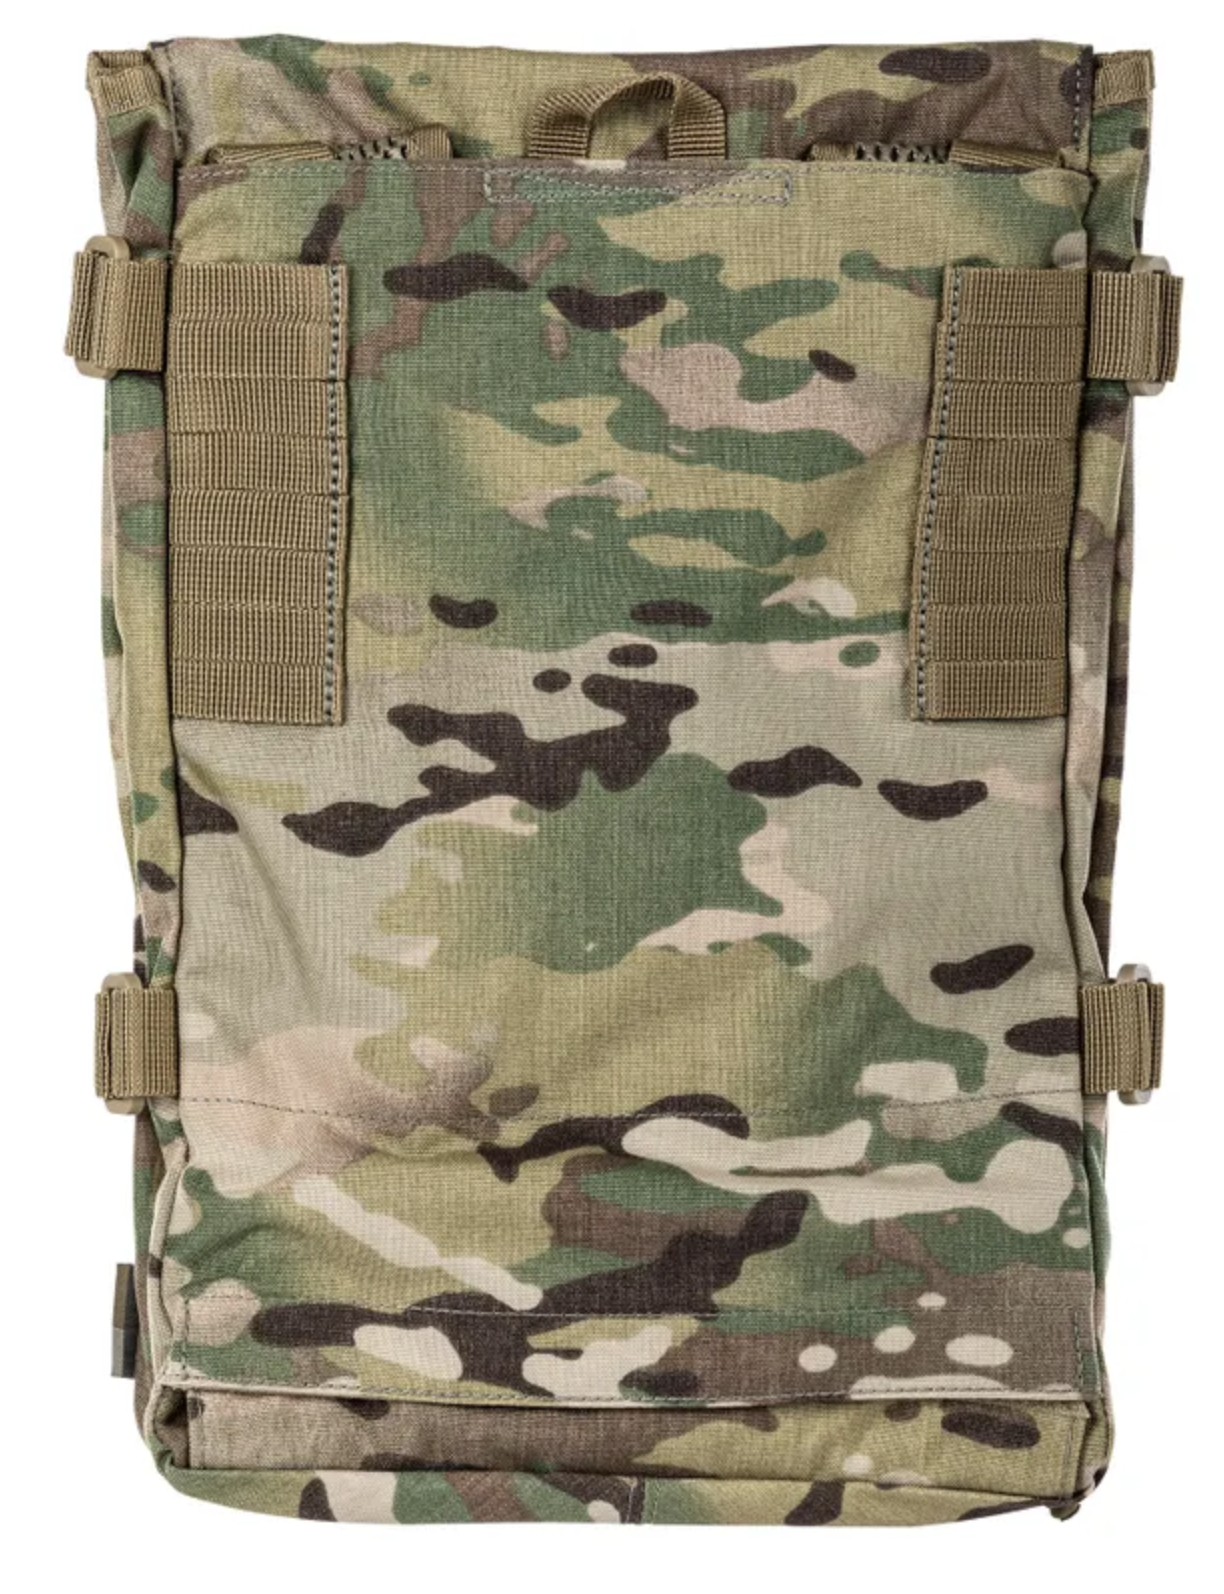 5.11 - MultiCam PC Convertible Hydration Carrier